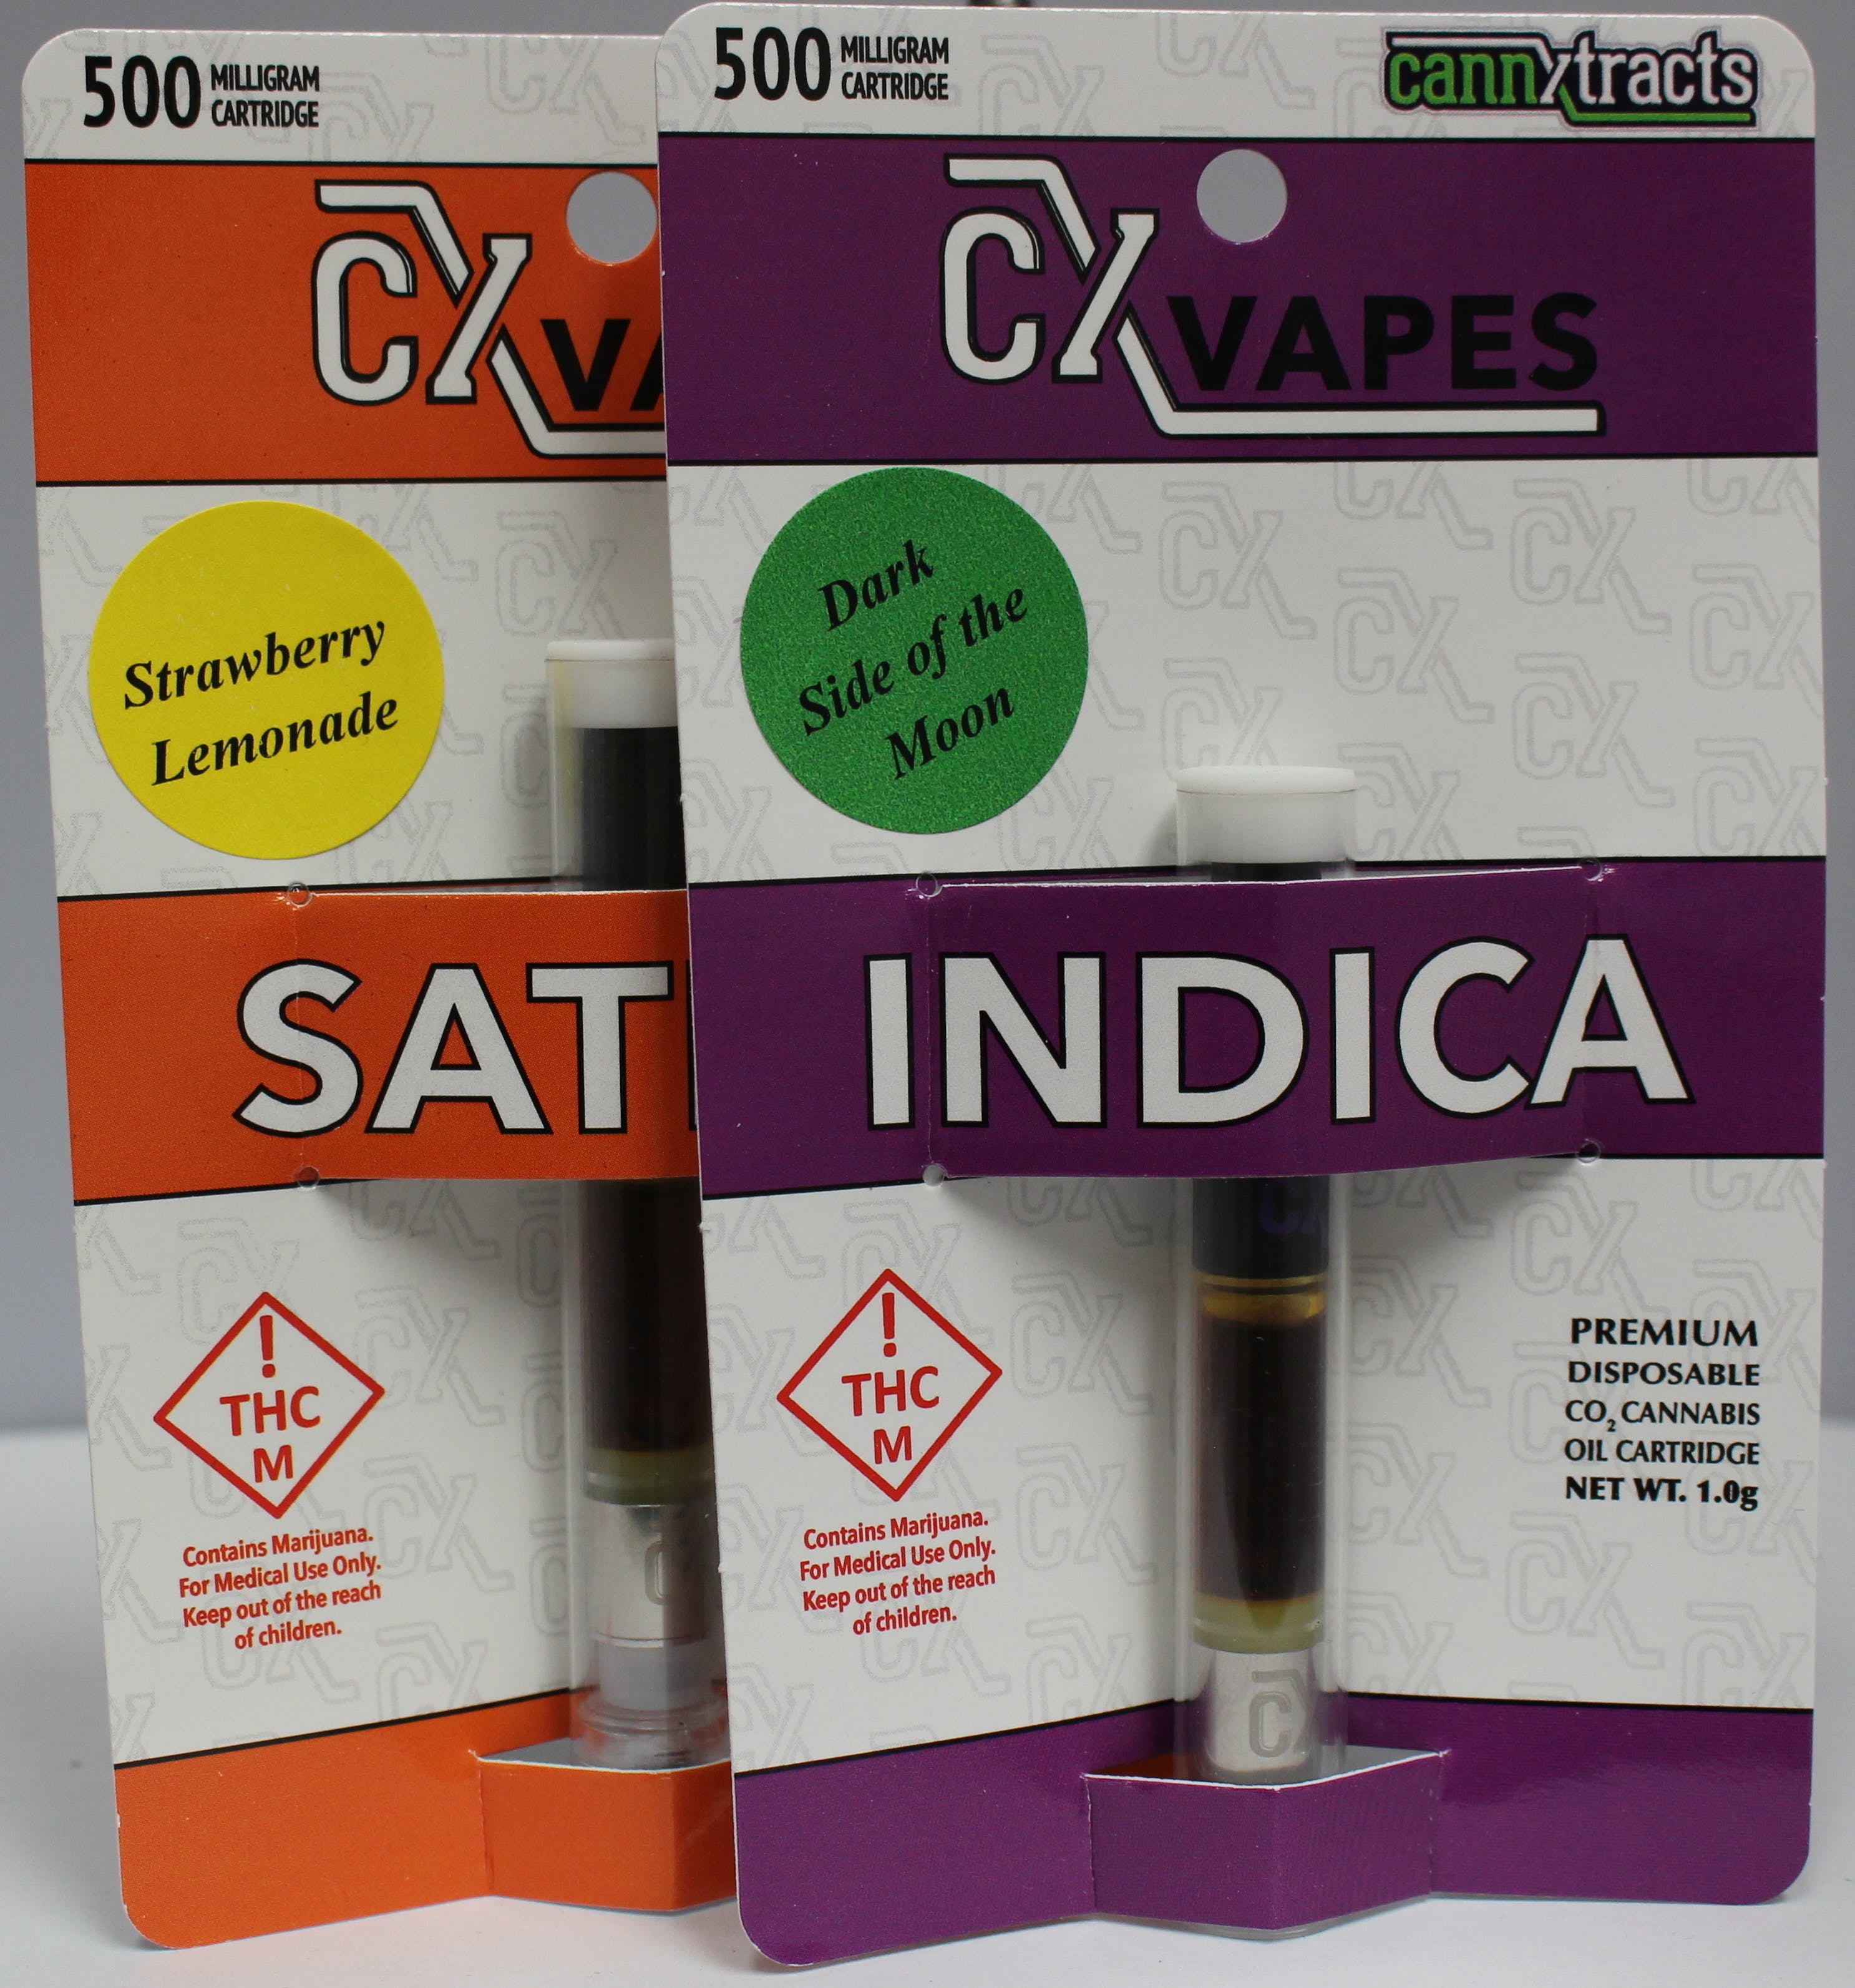 concentrate-500mg-cartridge-cx-vapes-indicasativa